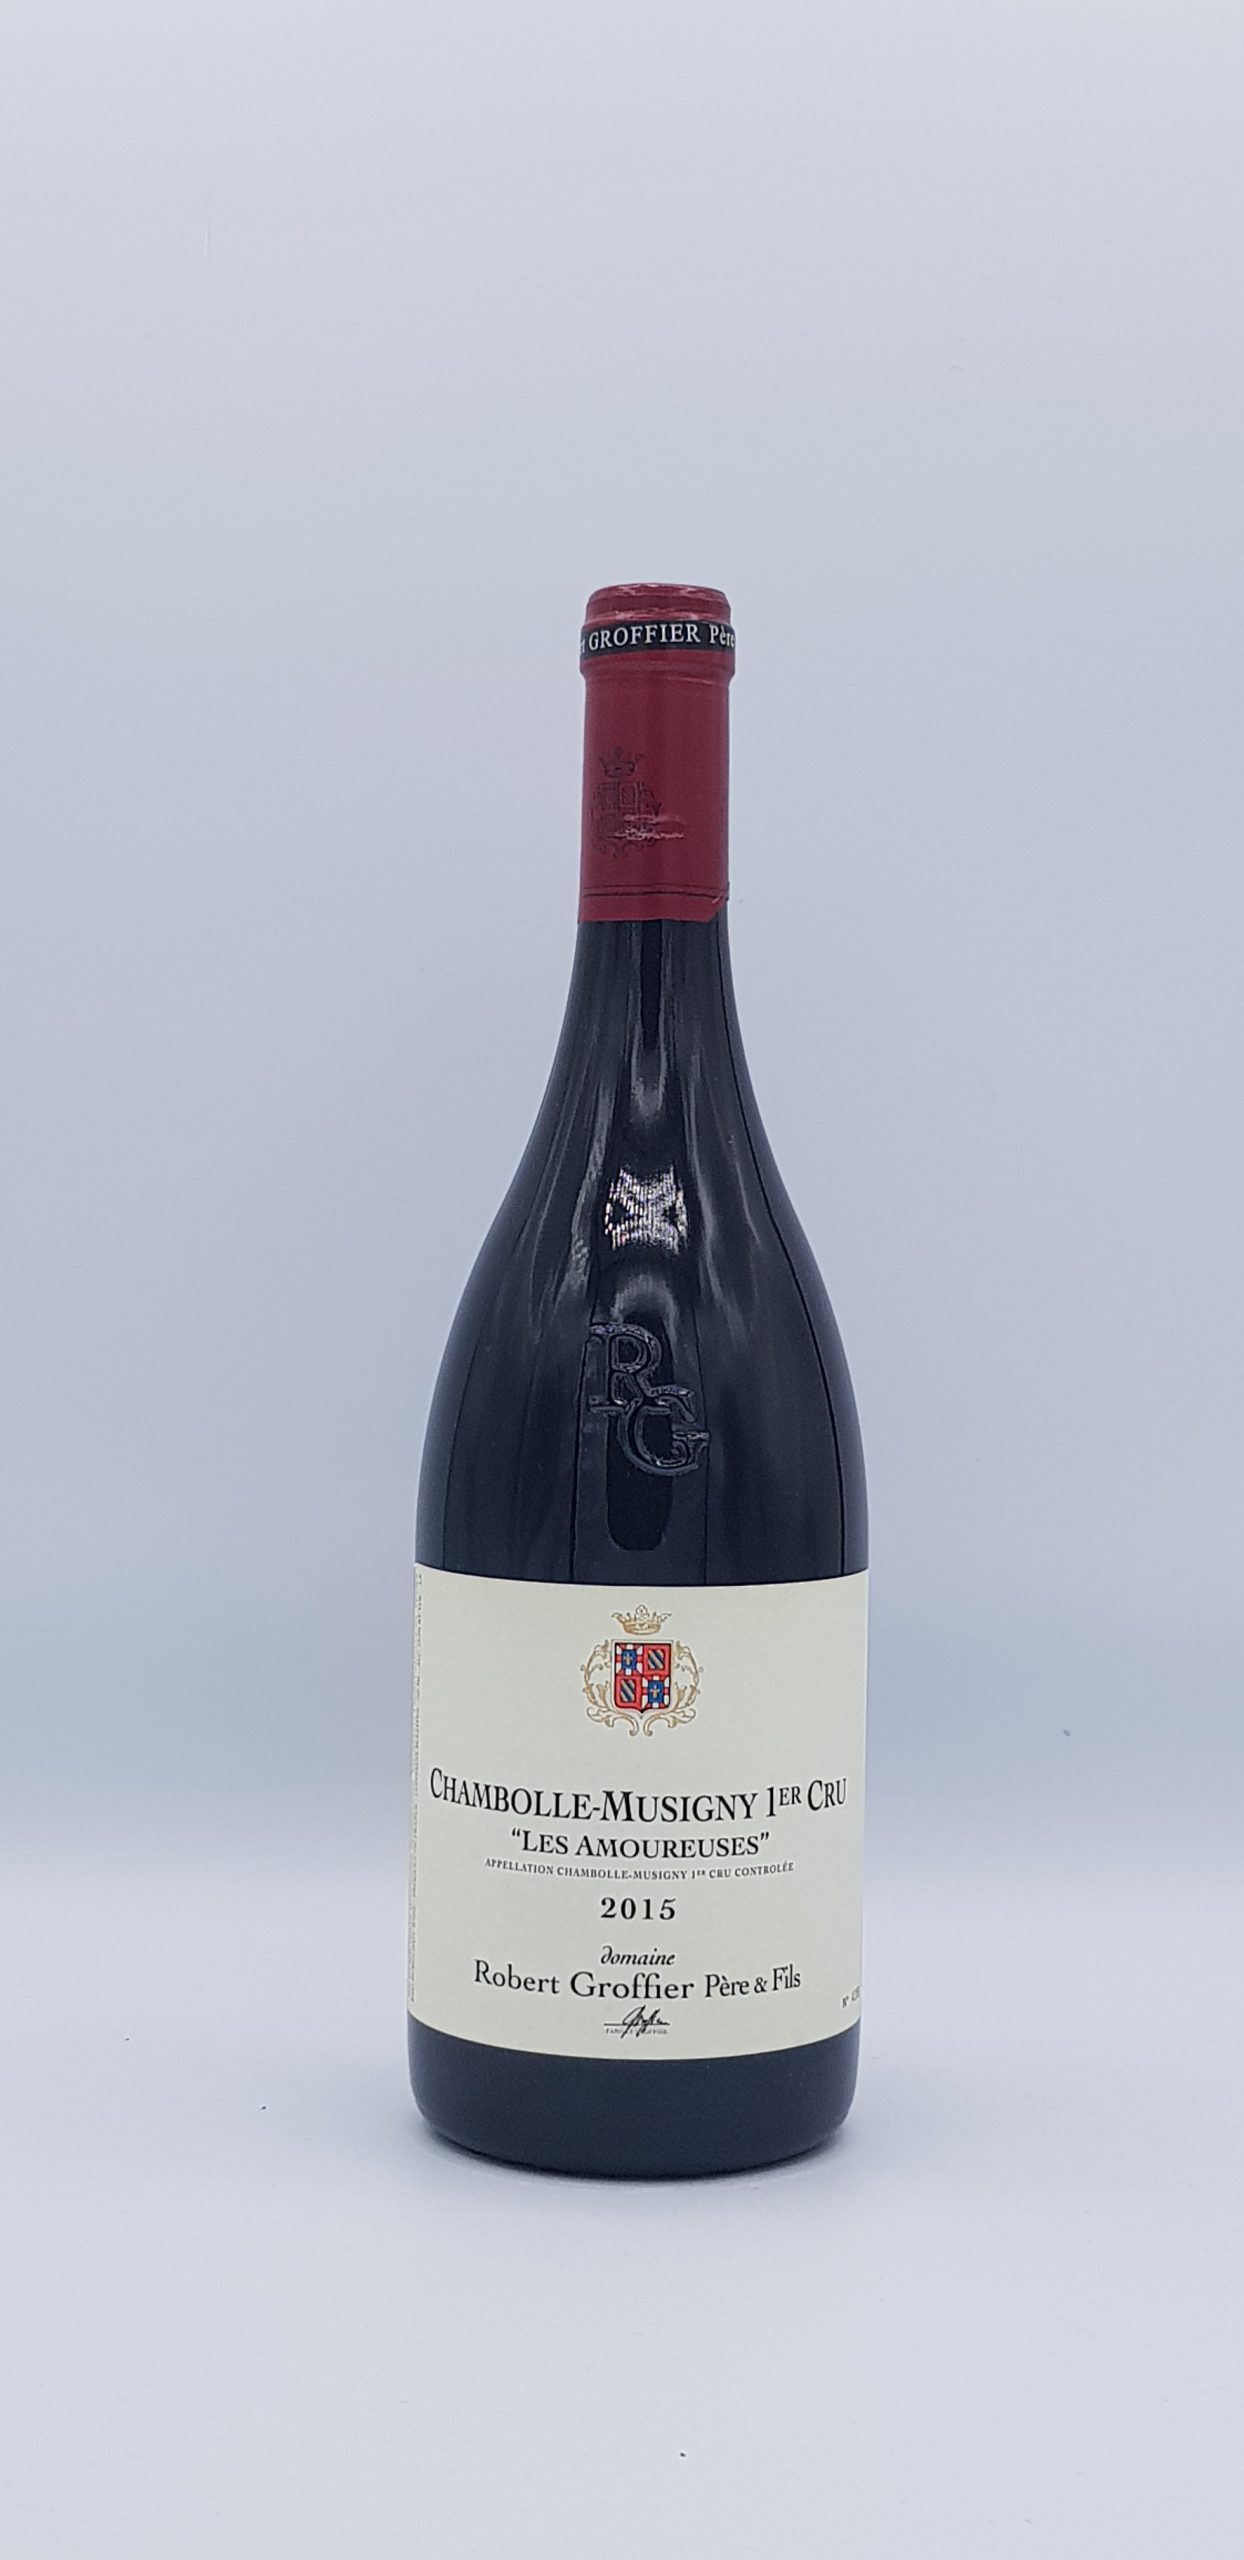 Chambolle Musigny 1Er Cru “Les Amoureuses” 2015